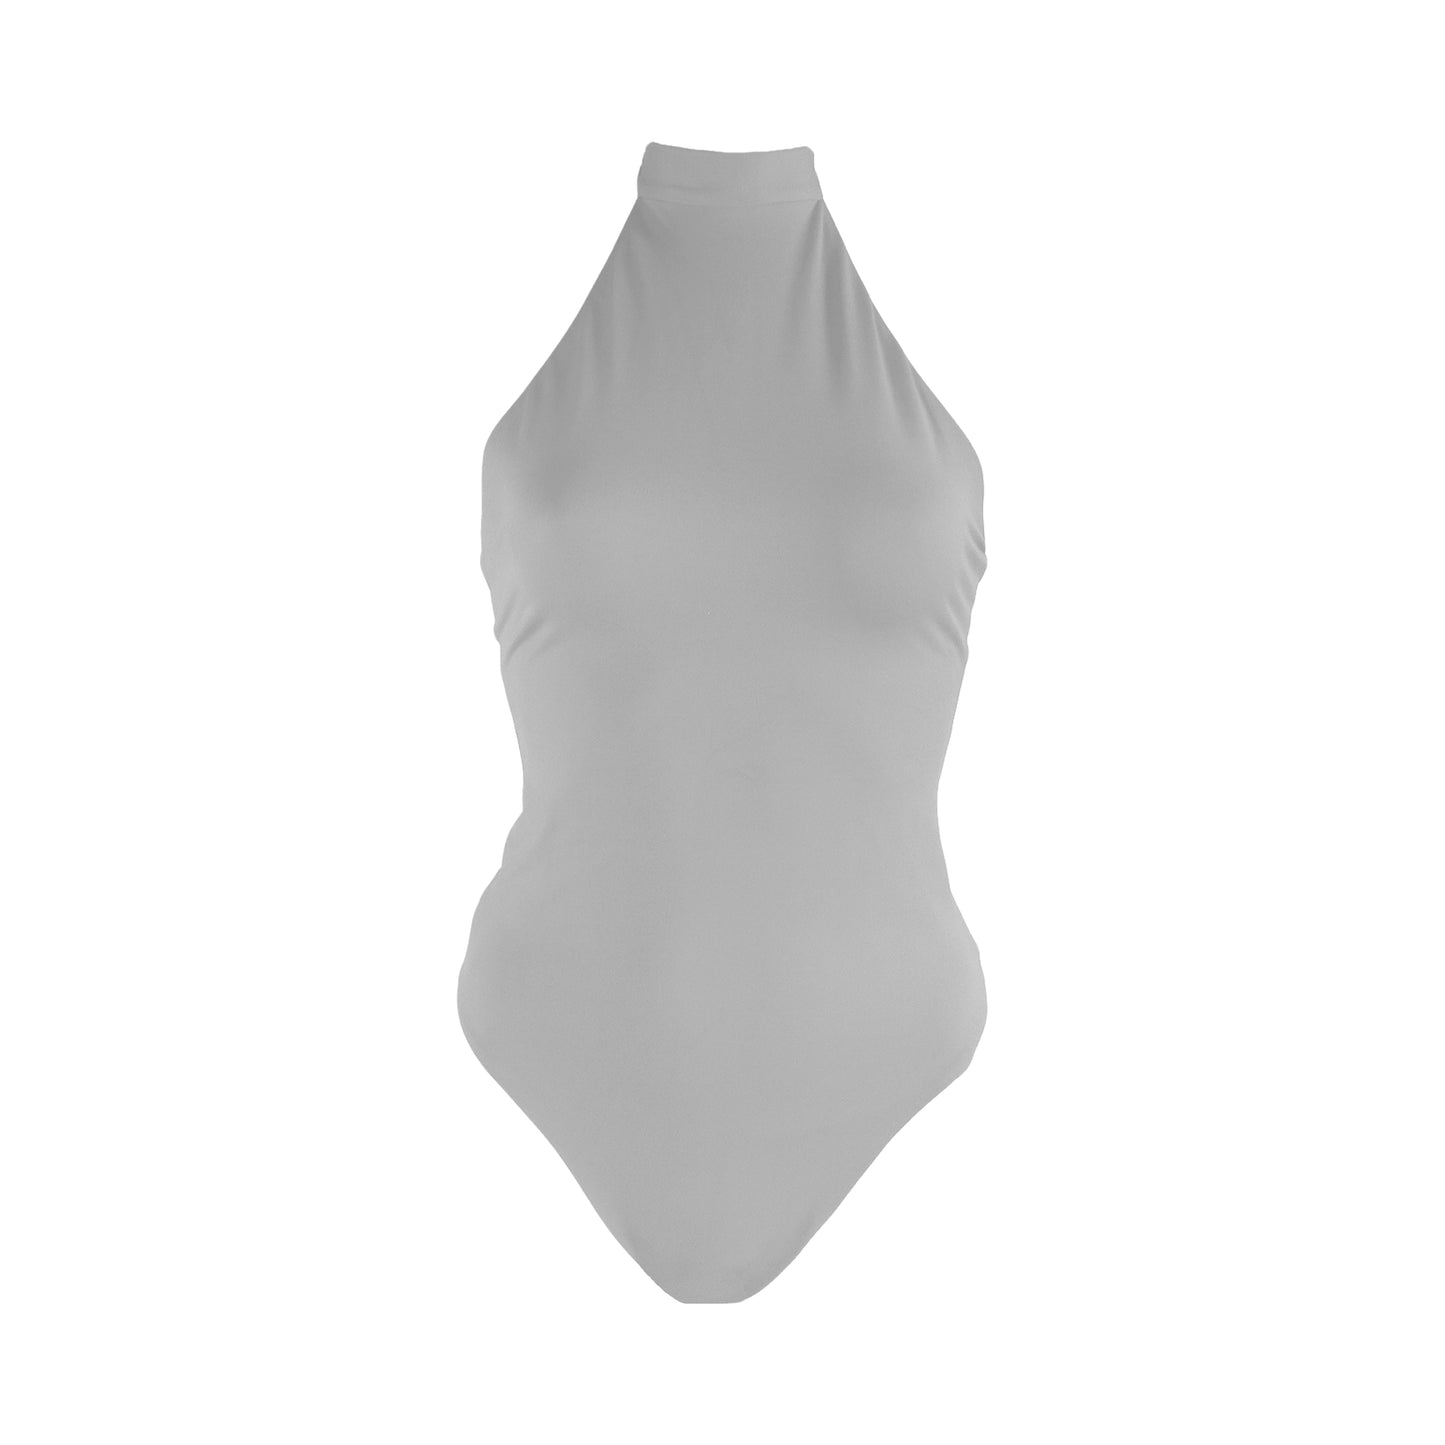 Light grey Tie mock neck halter one piece swimsuit with a low back, high cut legs and cheeky bum coverage.